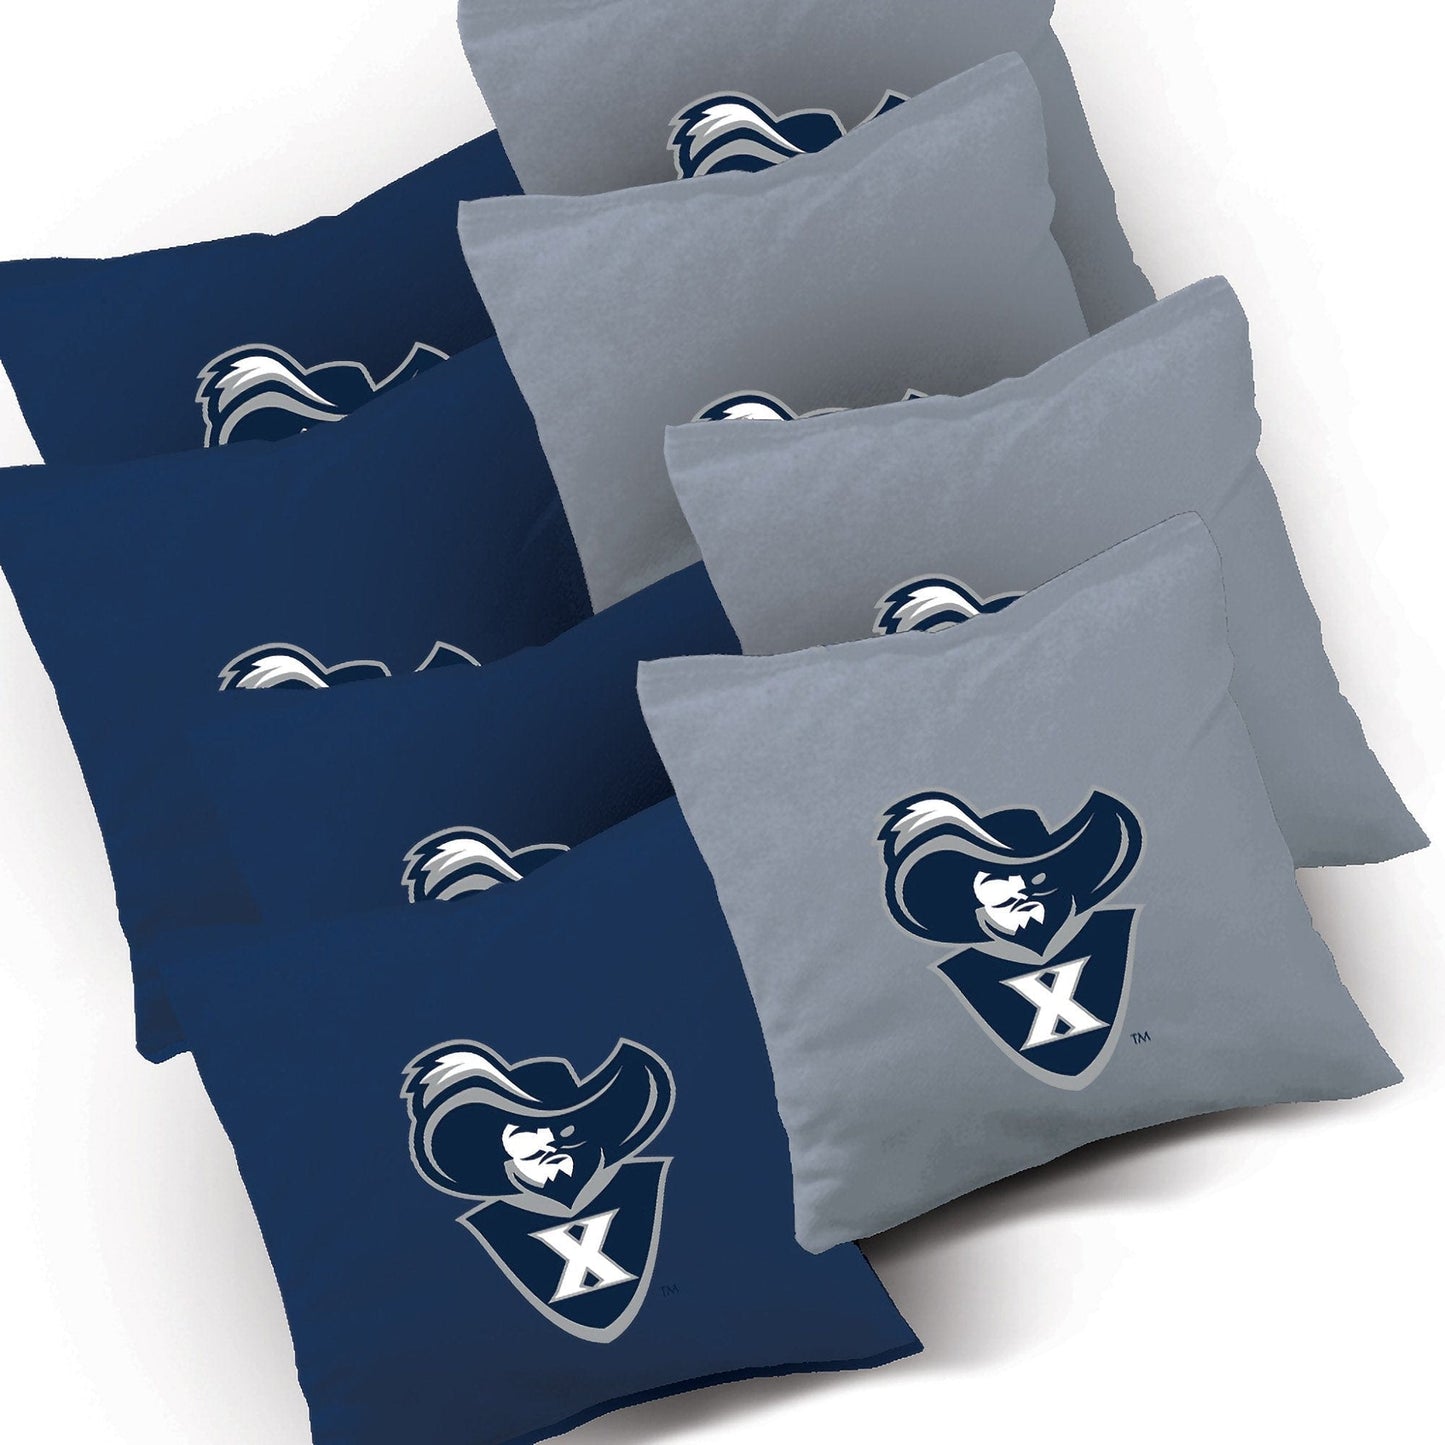 Xavier Stained Striped team logo bags